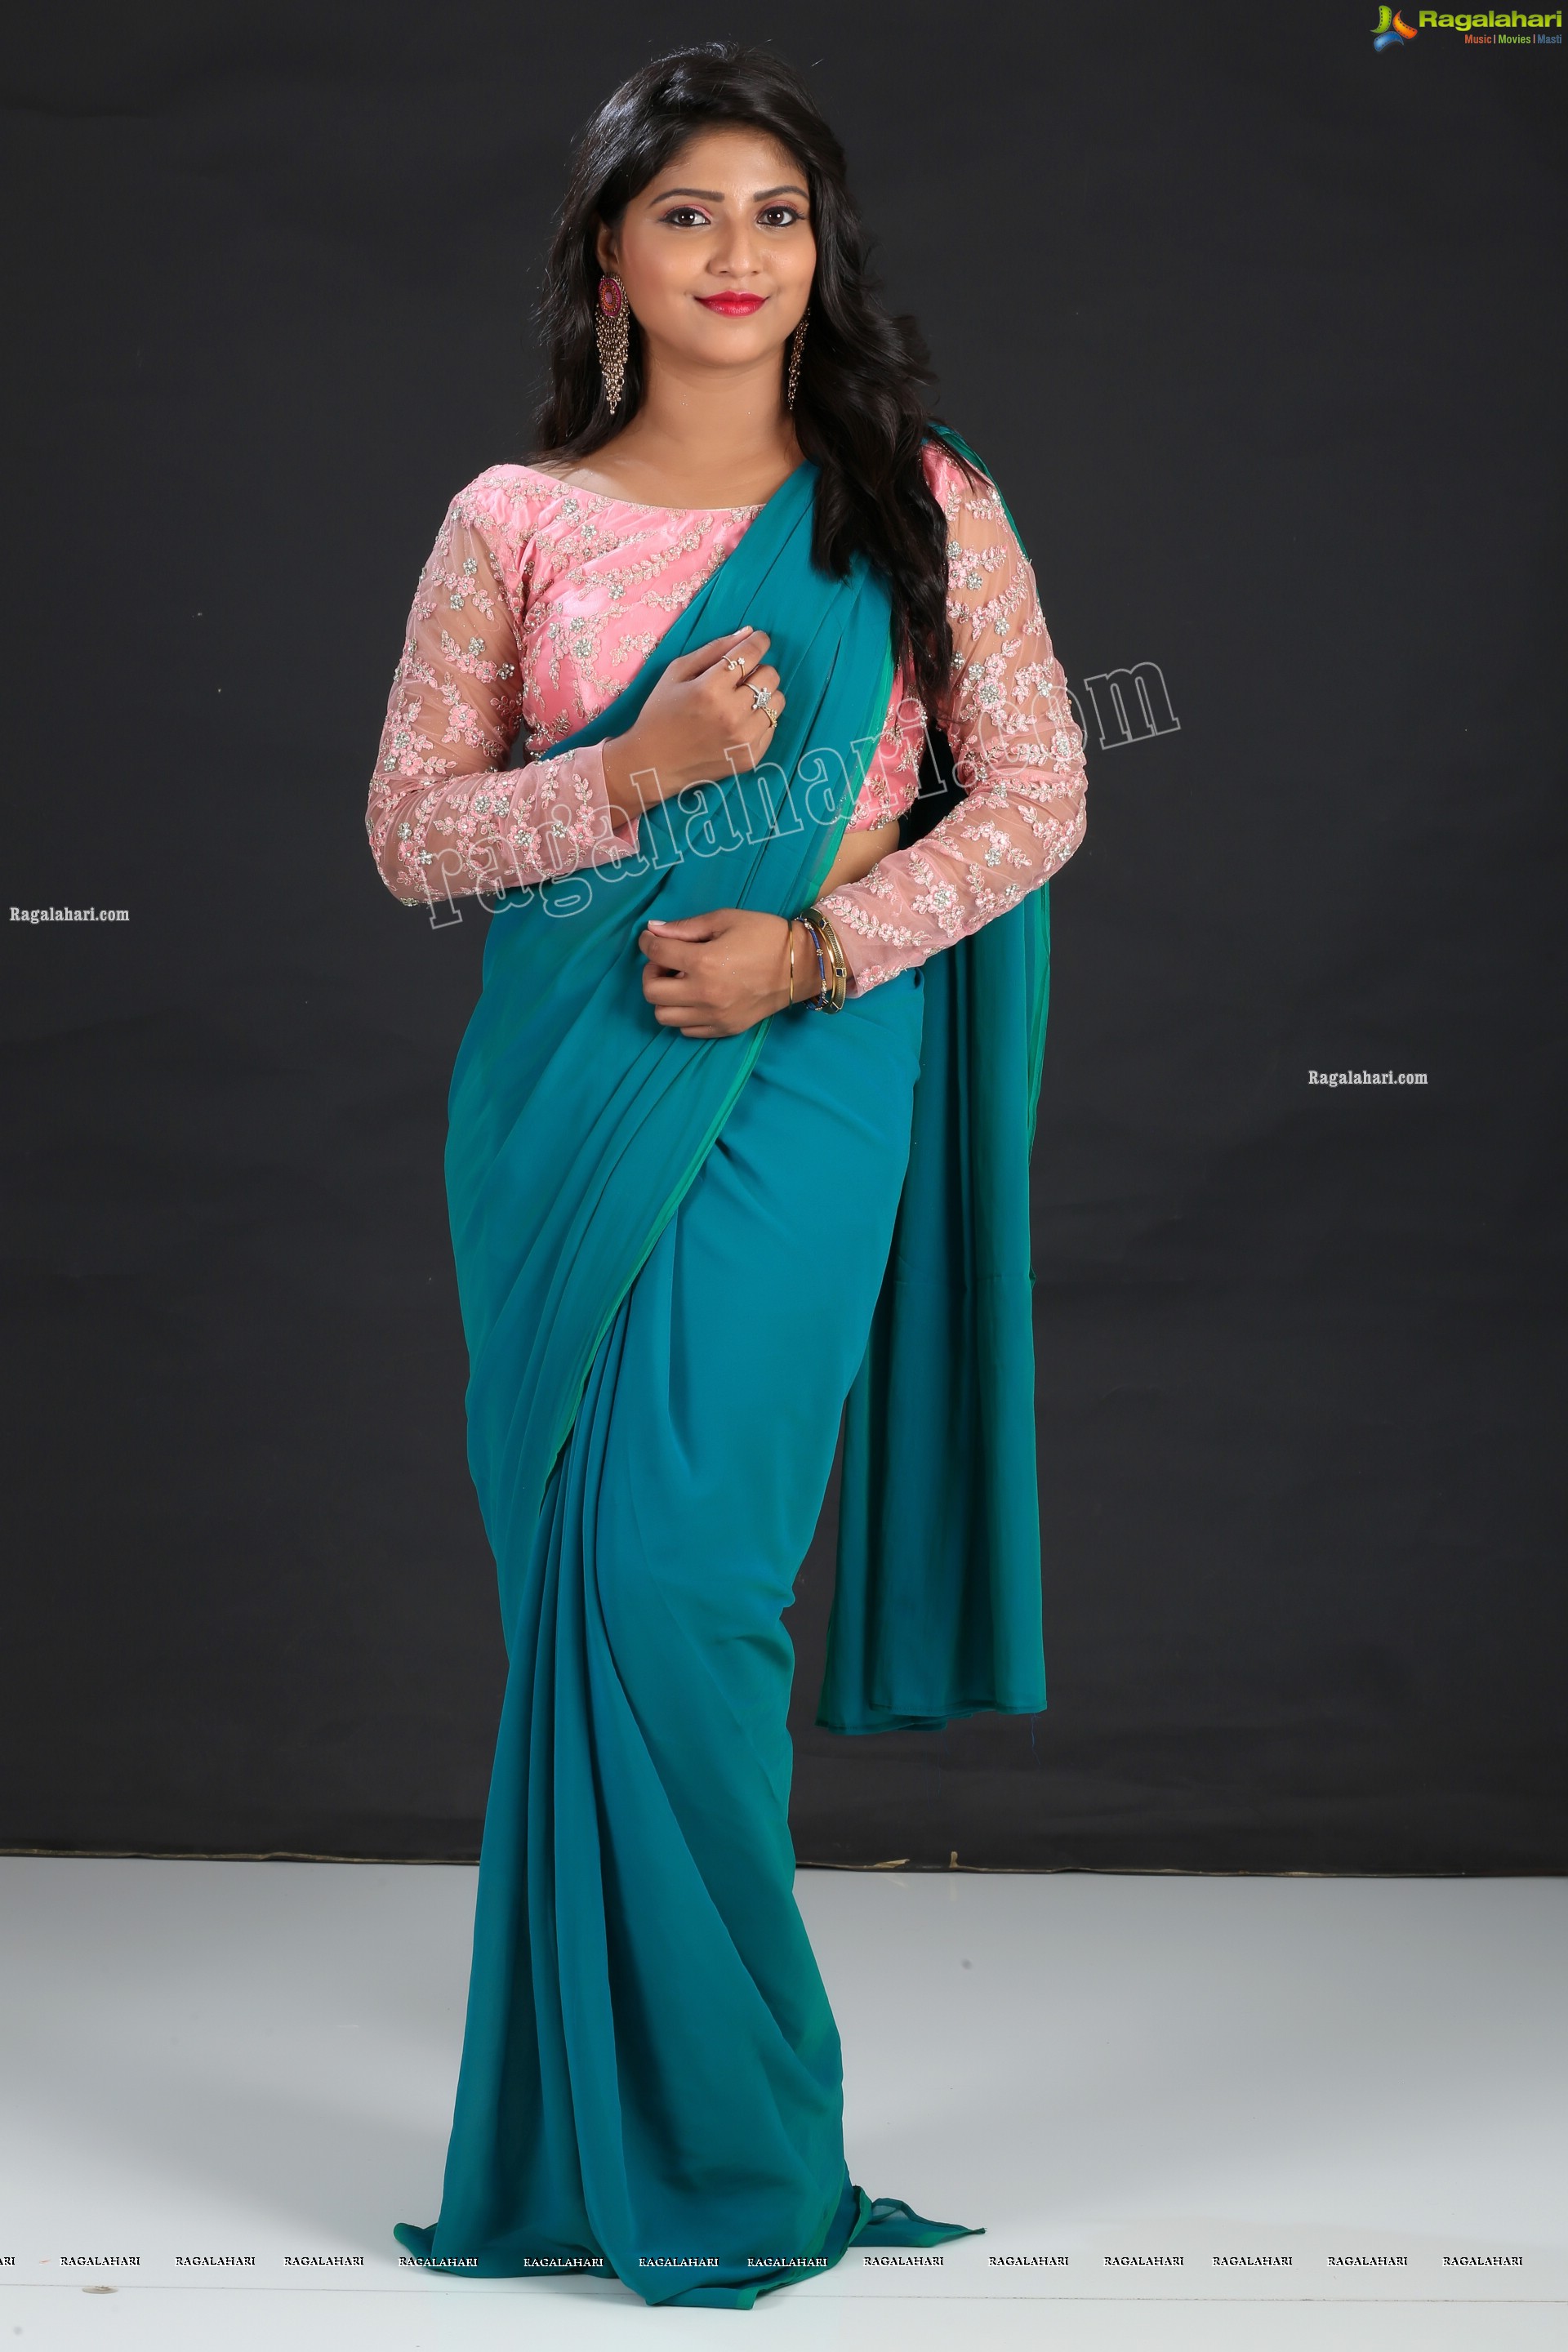 Shabeena Shaik in Light Blue Saree and Pink Blouse Exclusive Photo Shoot